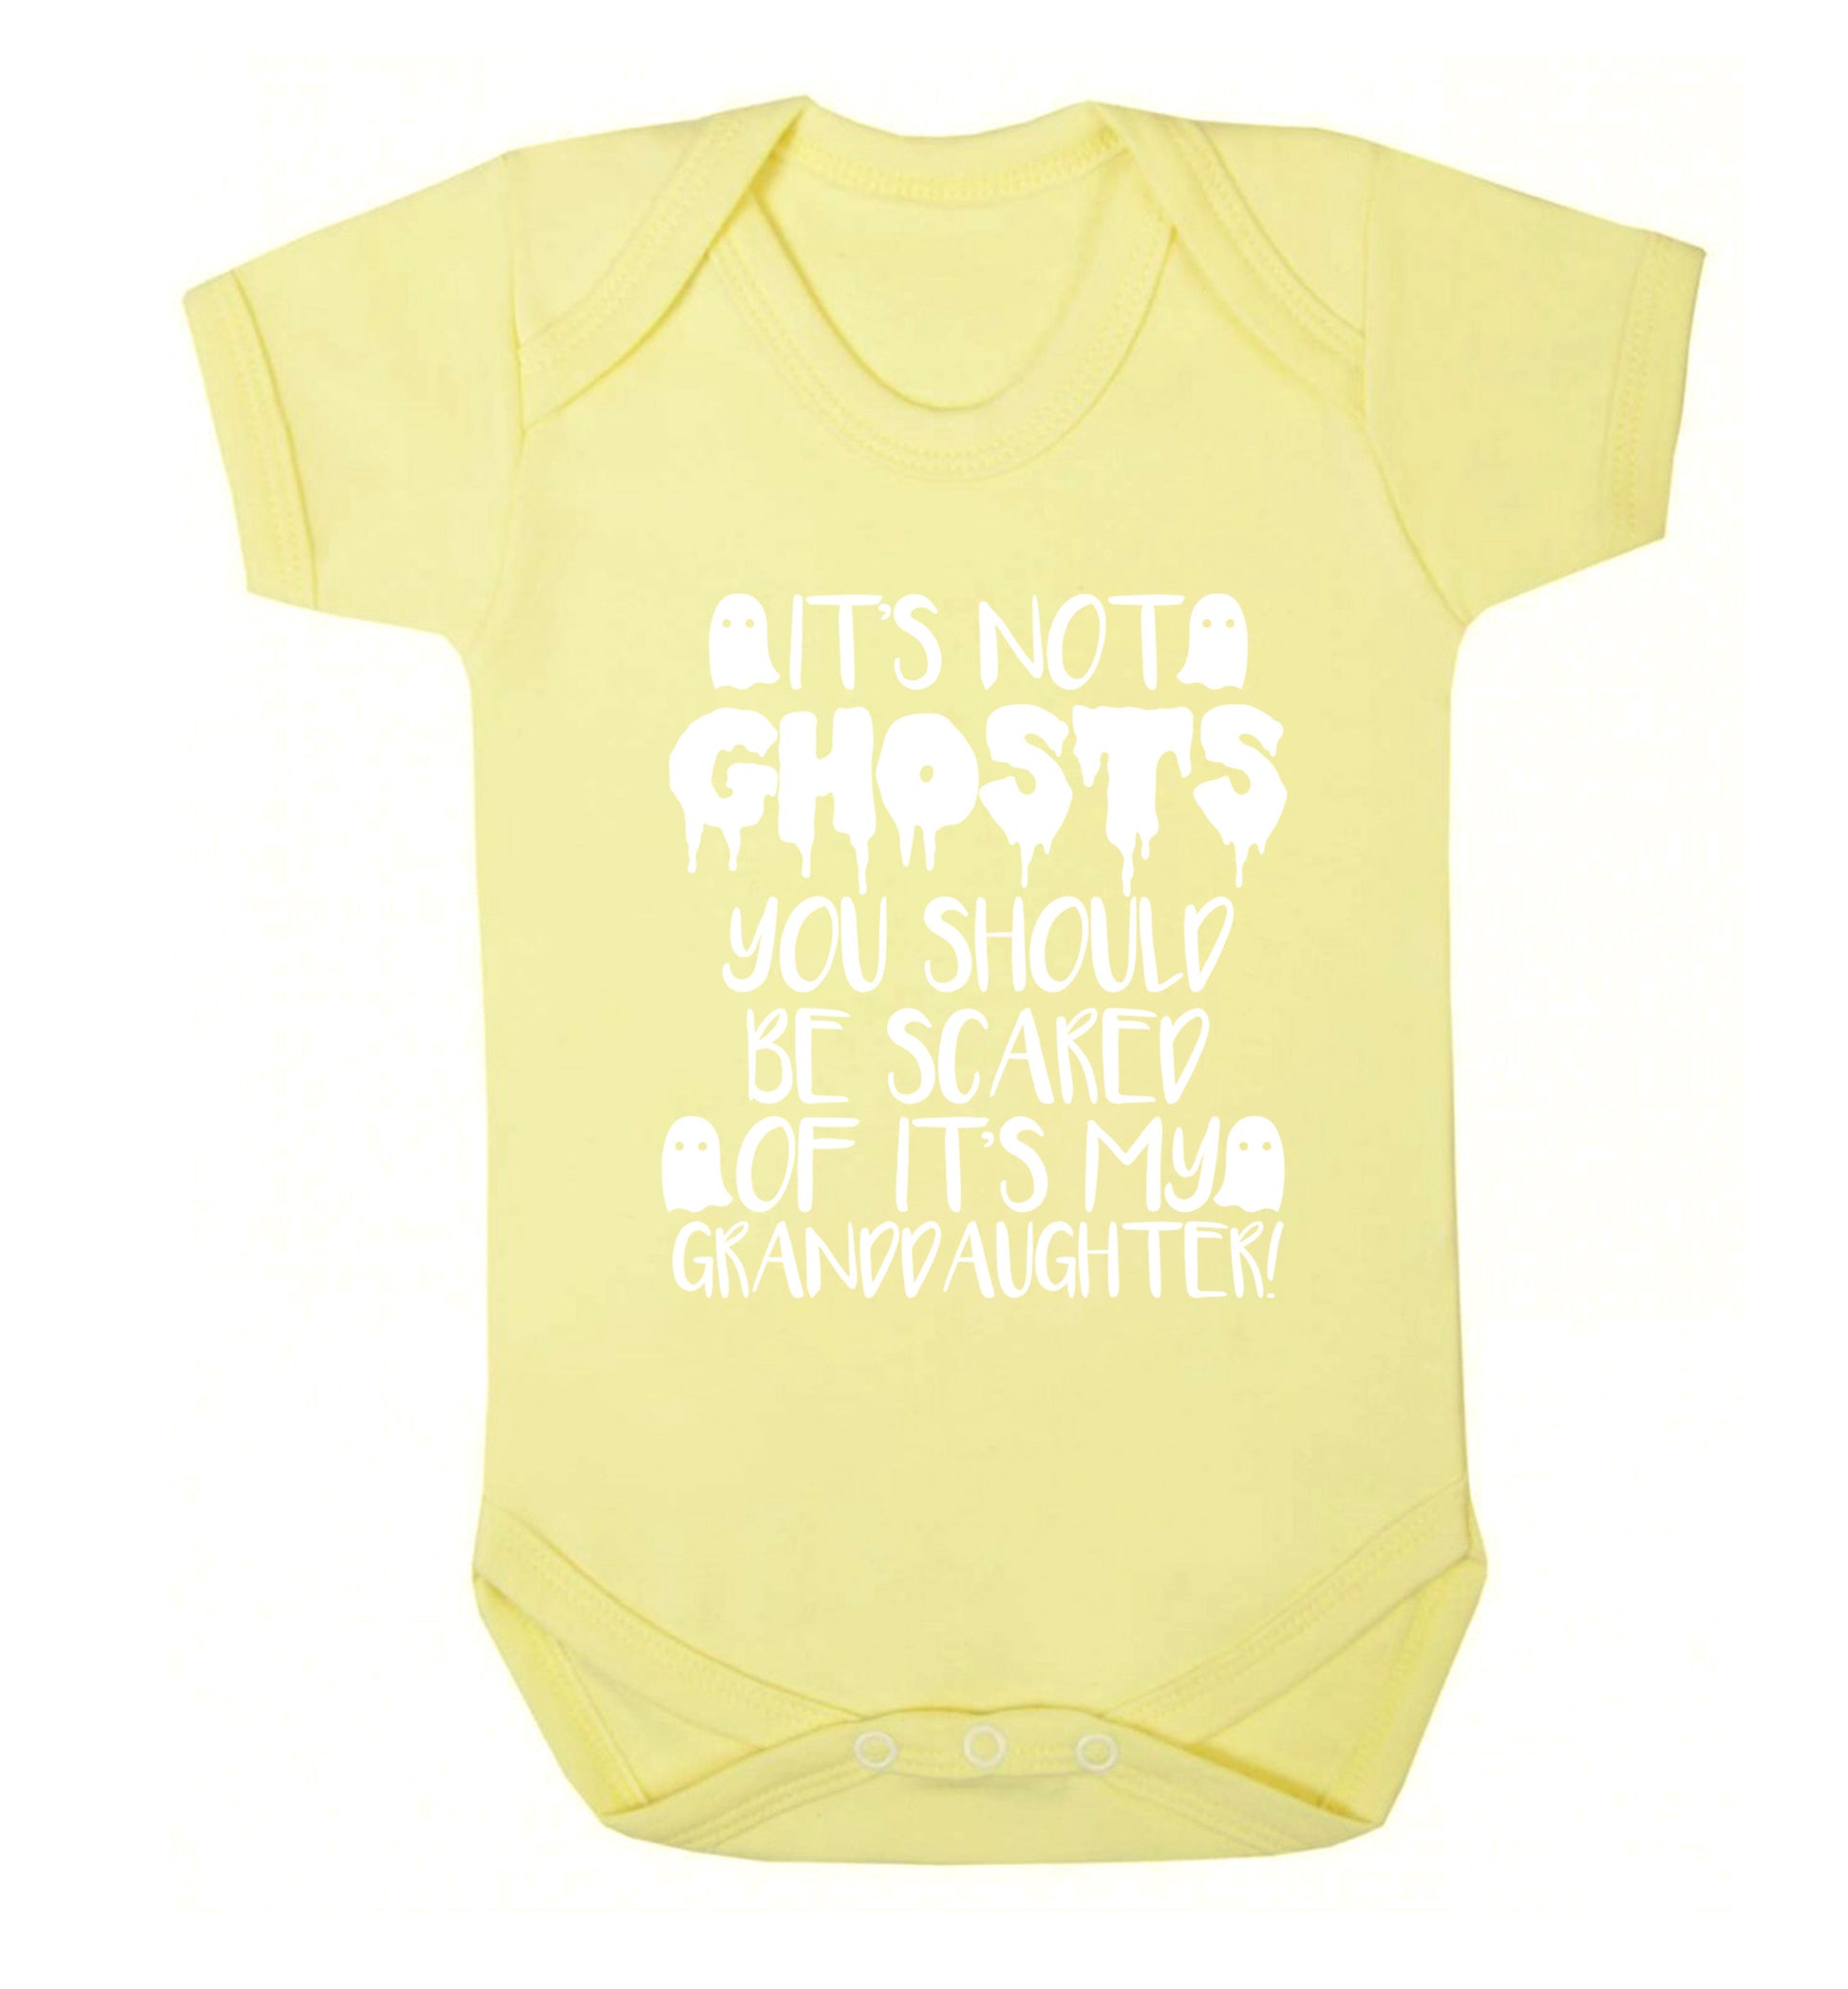 It's not ghosts you should be scared of it's my granddaughter! Baby Vest pale yellow 18-24 months